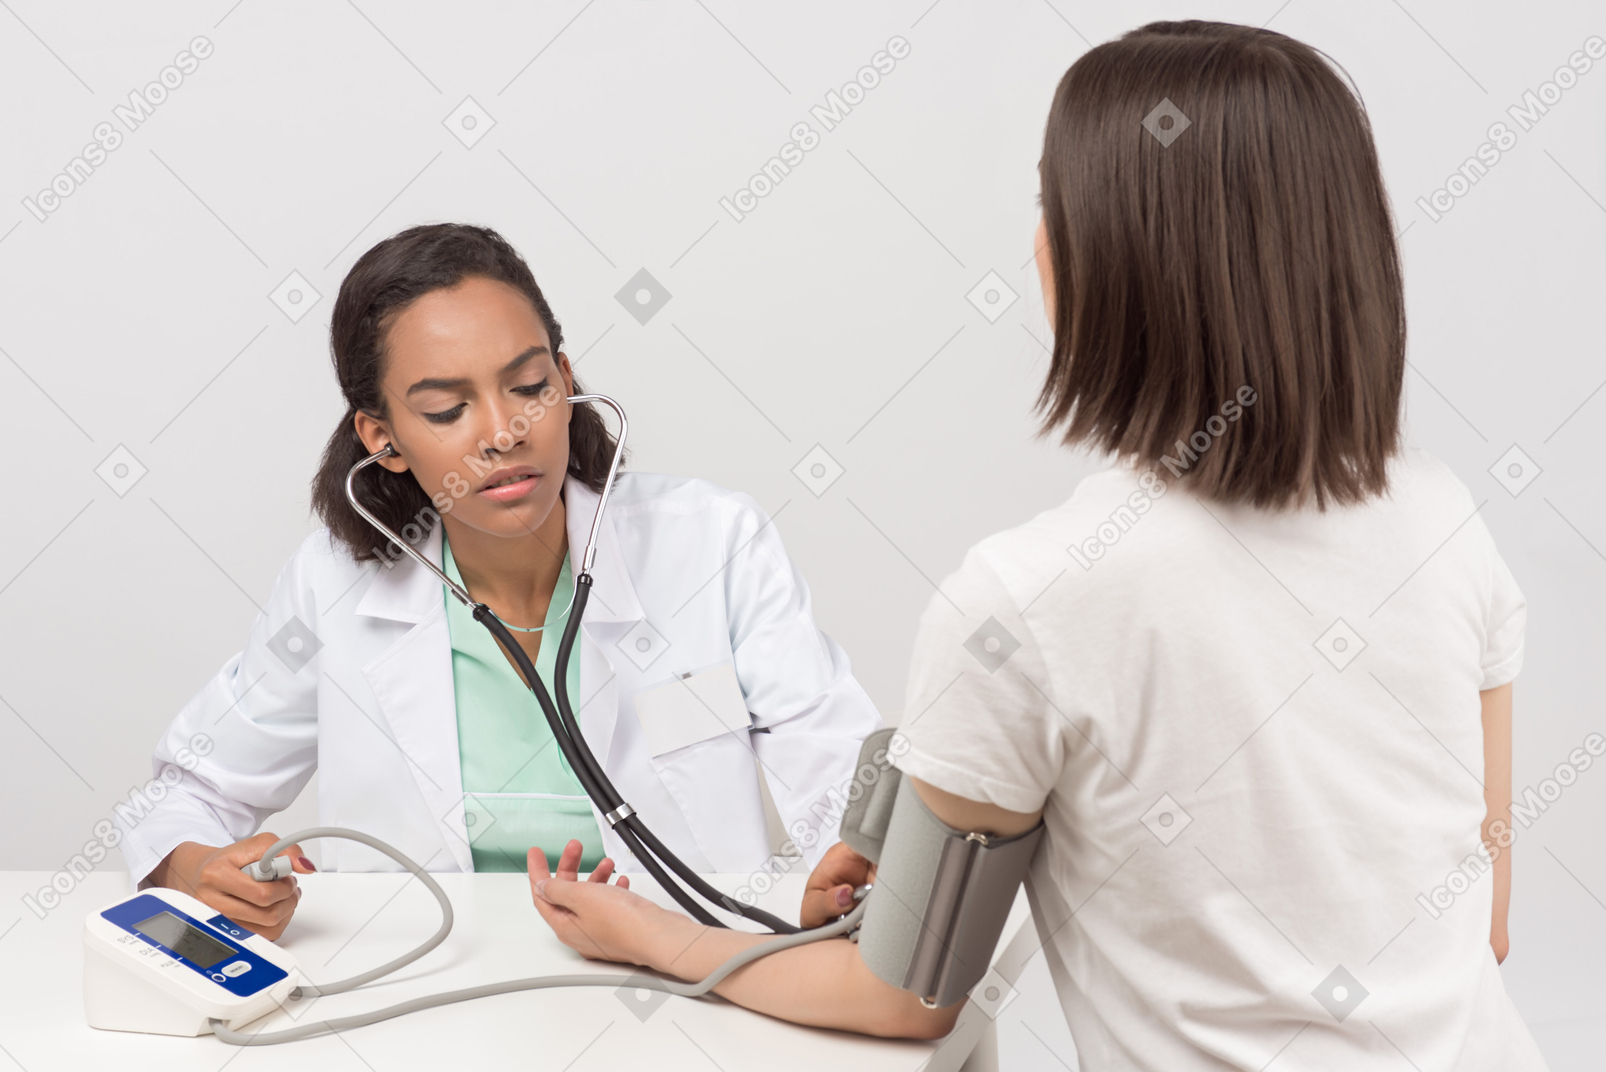 Concentrated on patient's examination